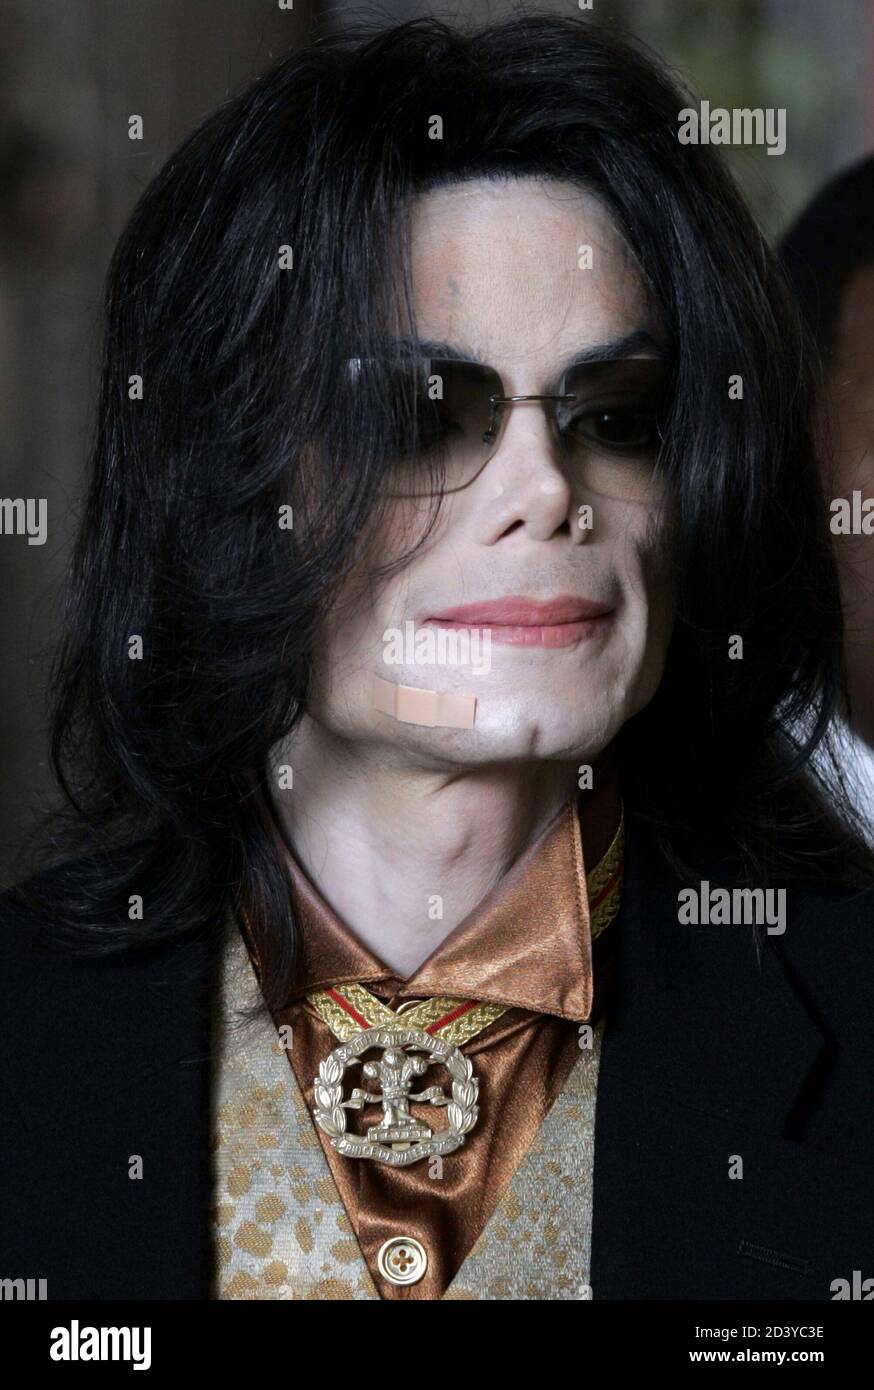 U.S. pop star Michael Jackson returns to the courtroom for a break in his  child molestation trial at the Santa Barbara County Courthouse in Santa  Maria, California, March 25, 2005 Stock Photo - Alamy